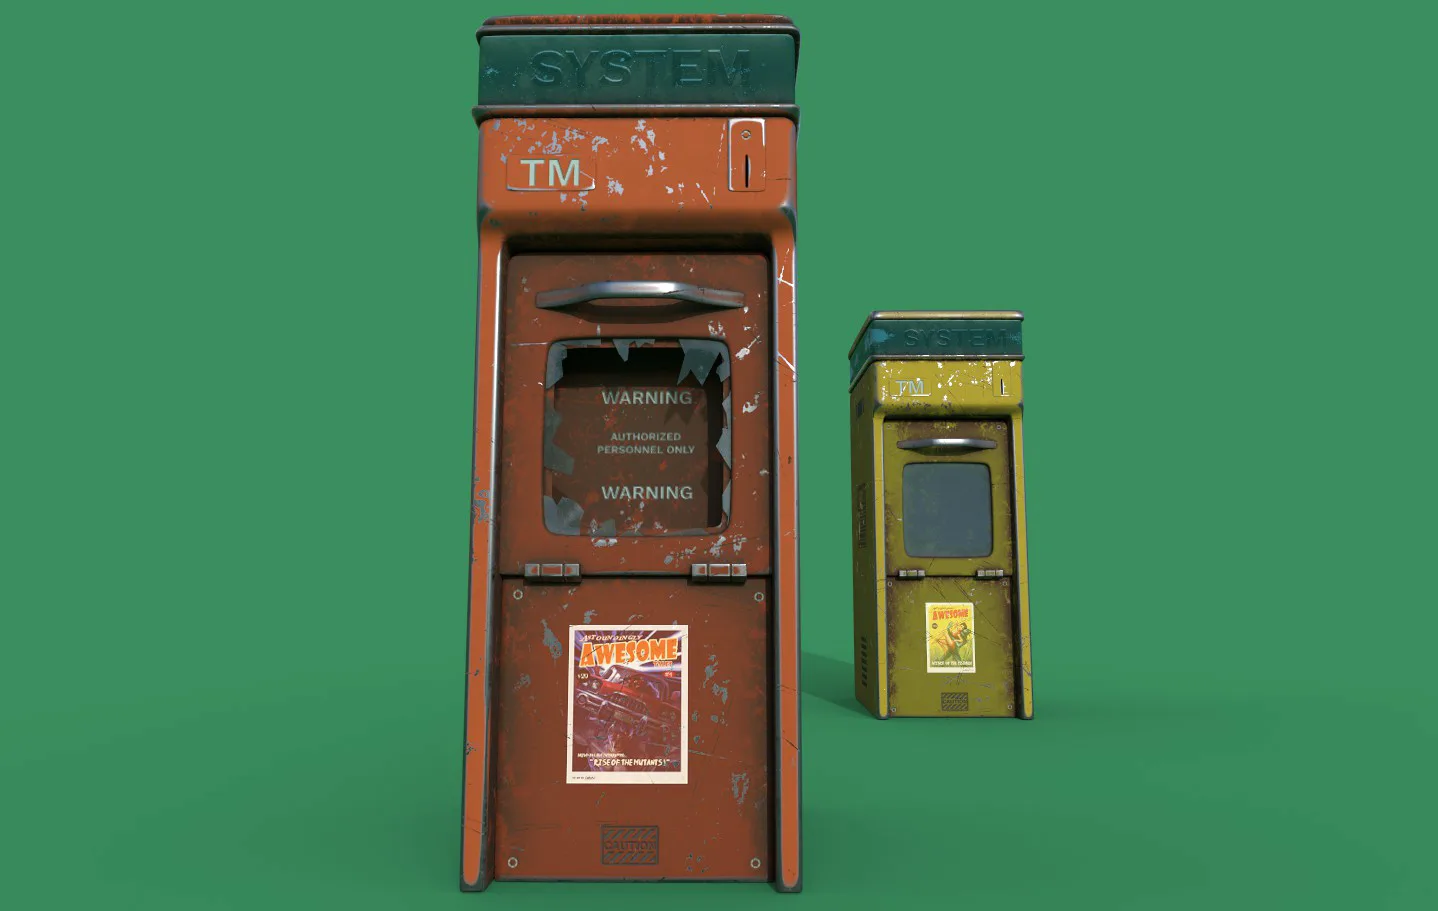 News stand series old game ready street assets low poly and high poly